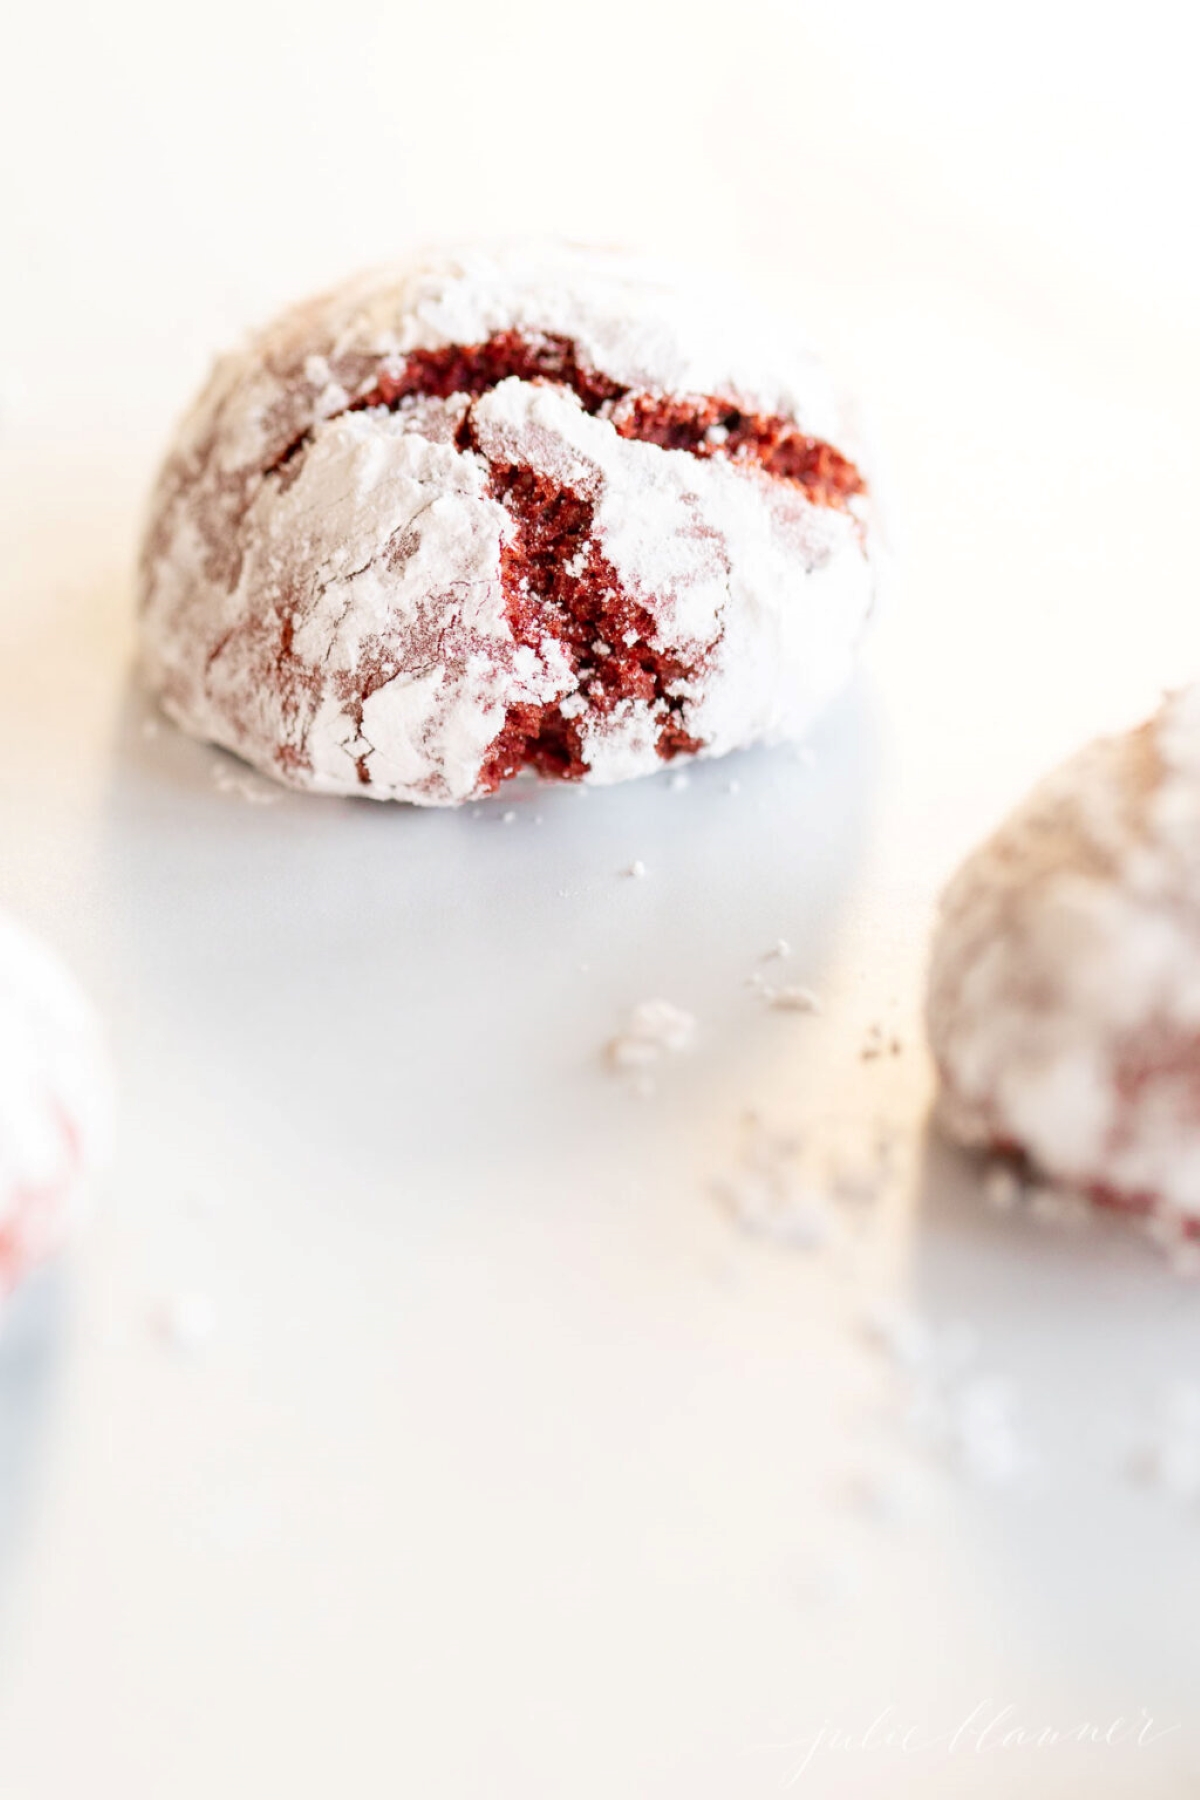 A red velvet Christmas cookie on a white surface.